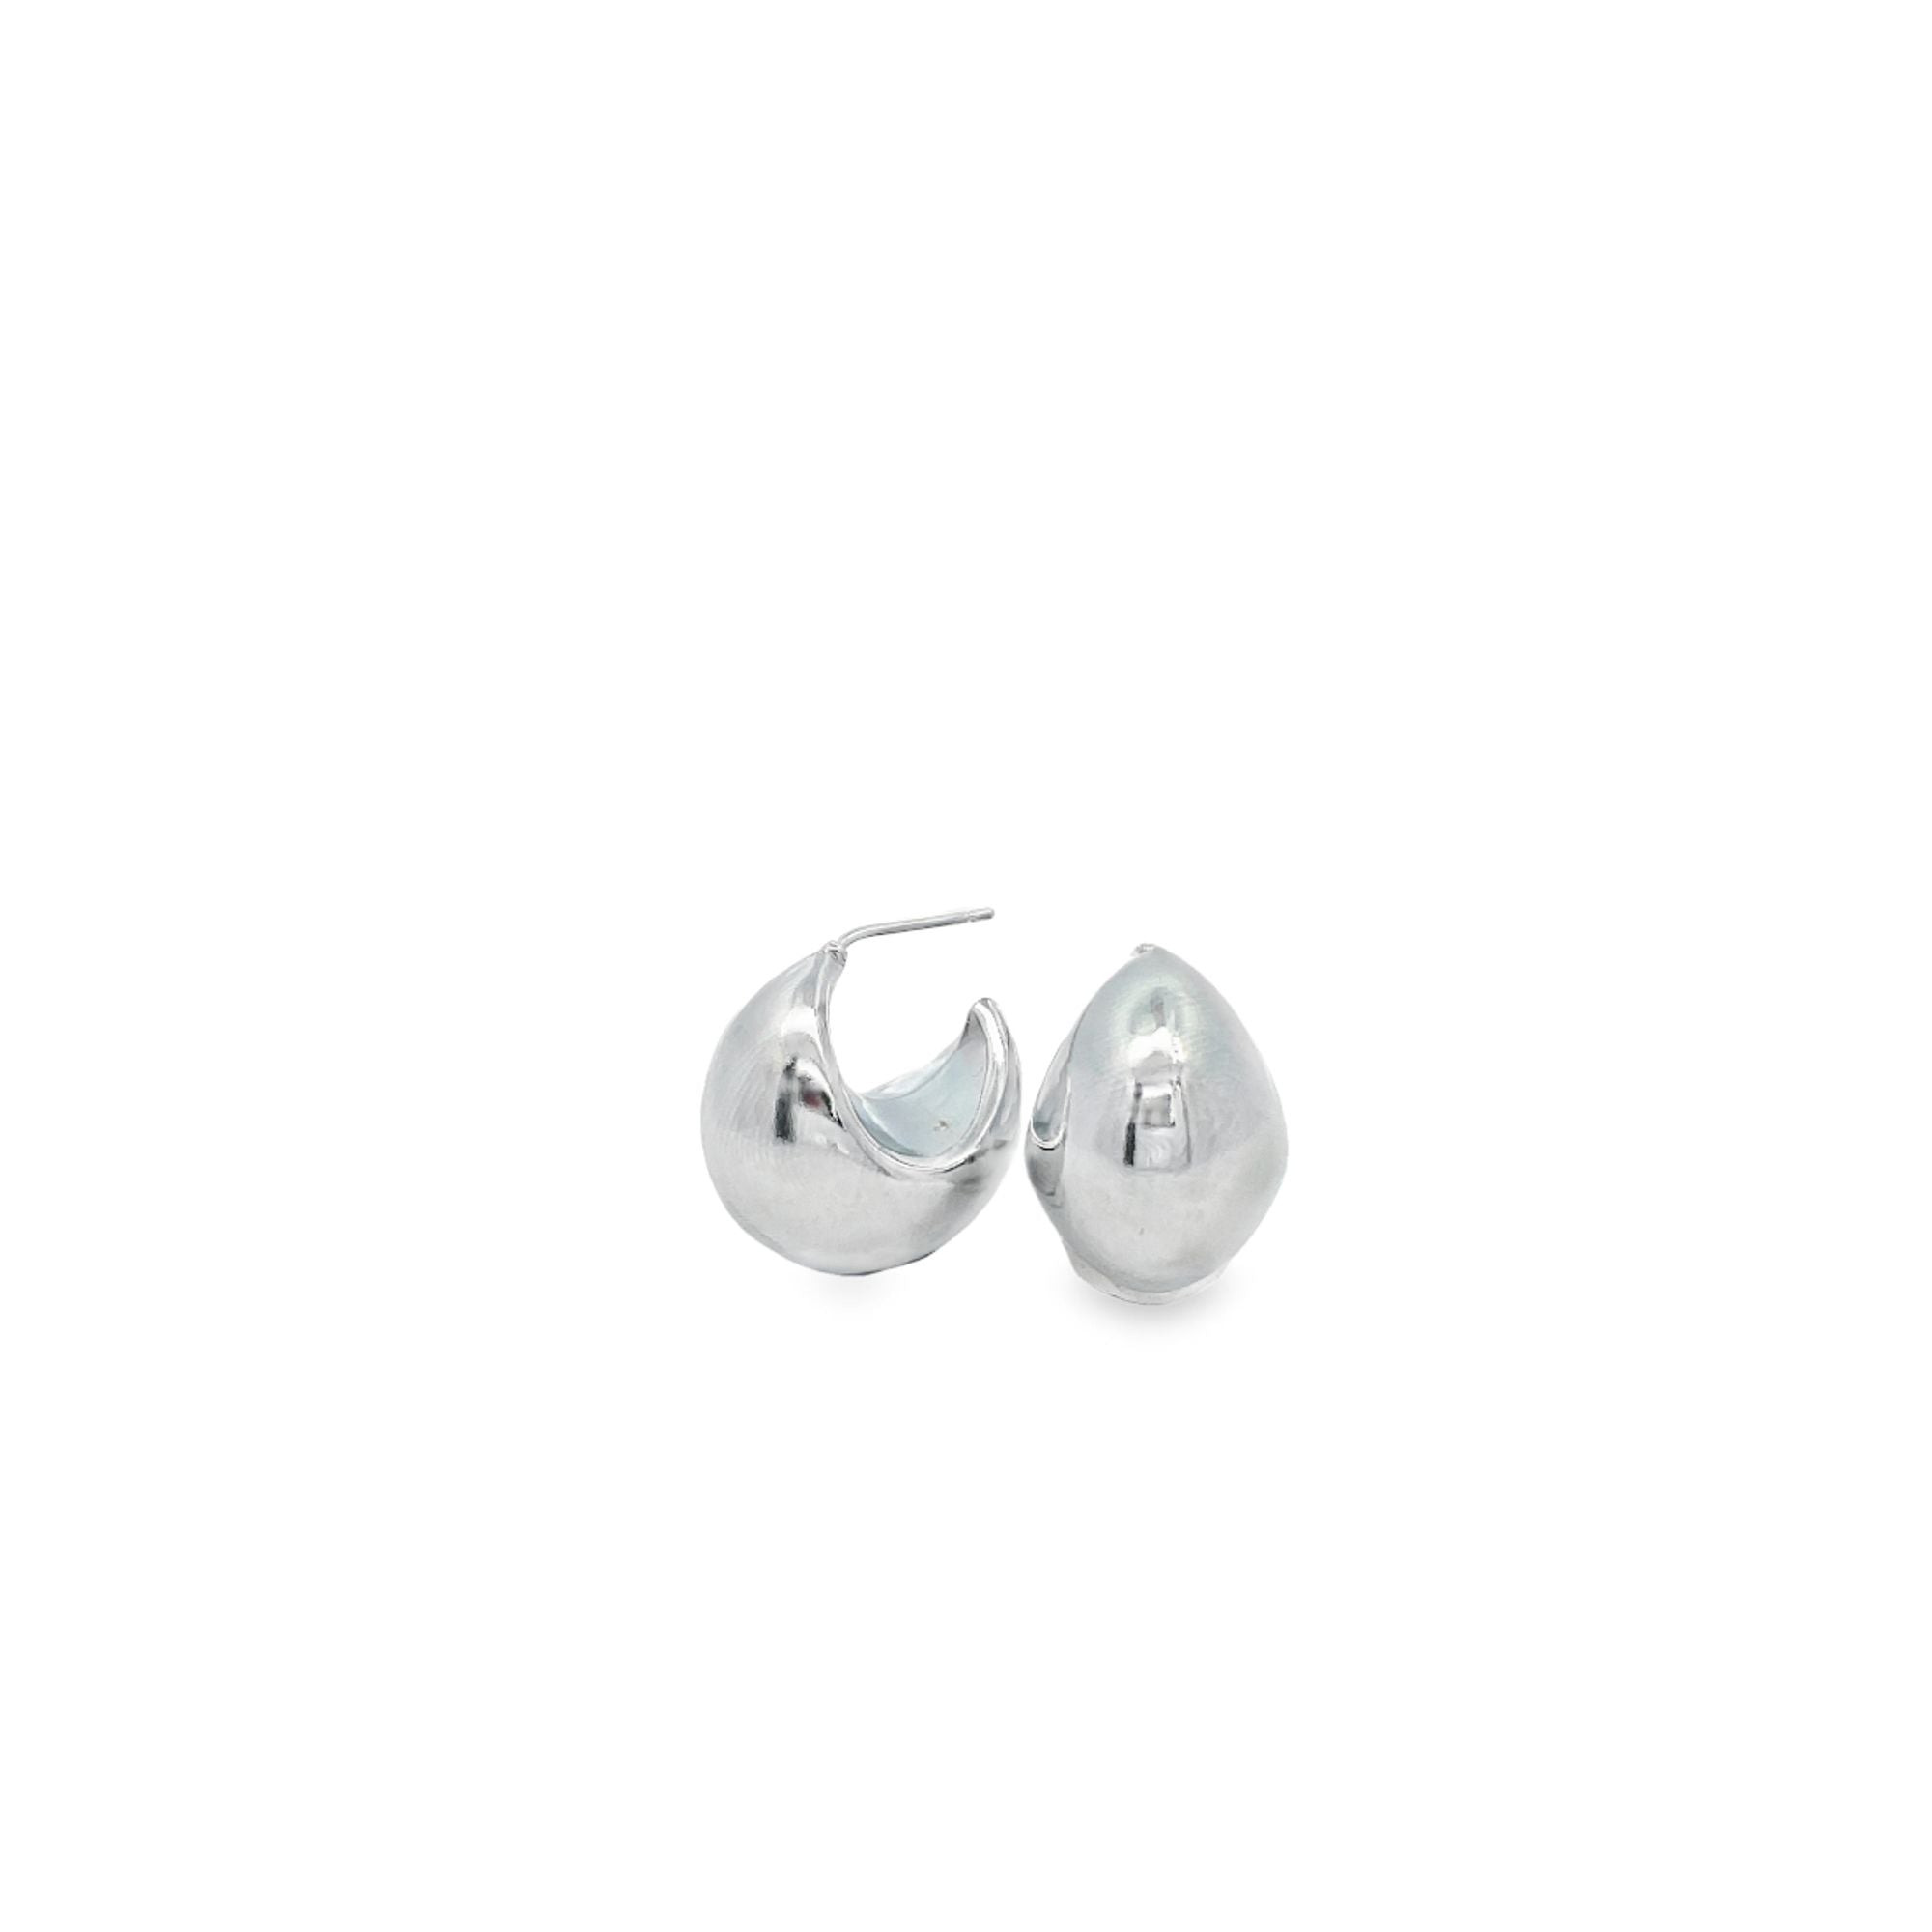 Thick Crescent Shape Earrings (L561)